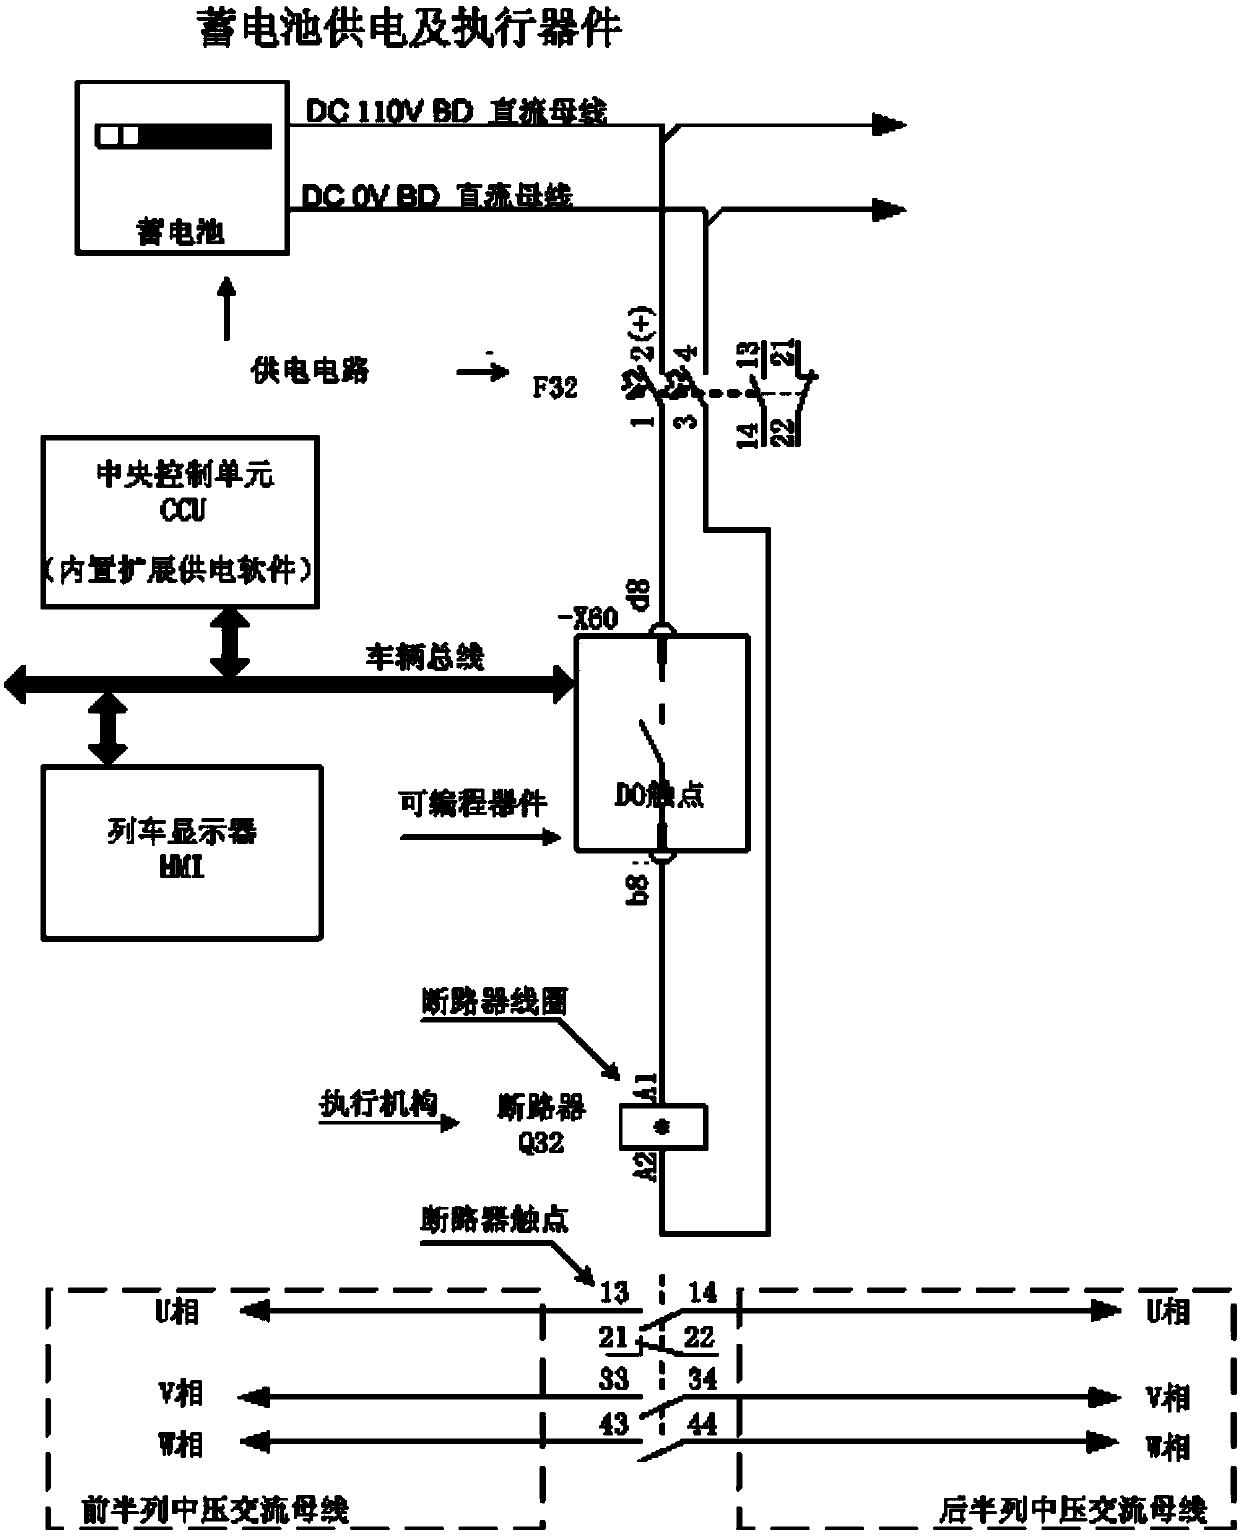 Long marshaled train medium-voltage alternating current extension power supply system and method